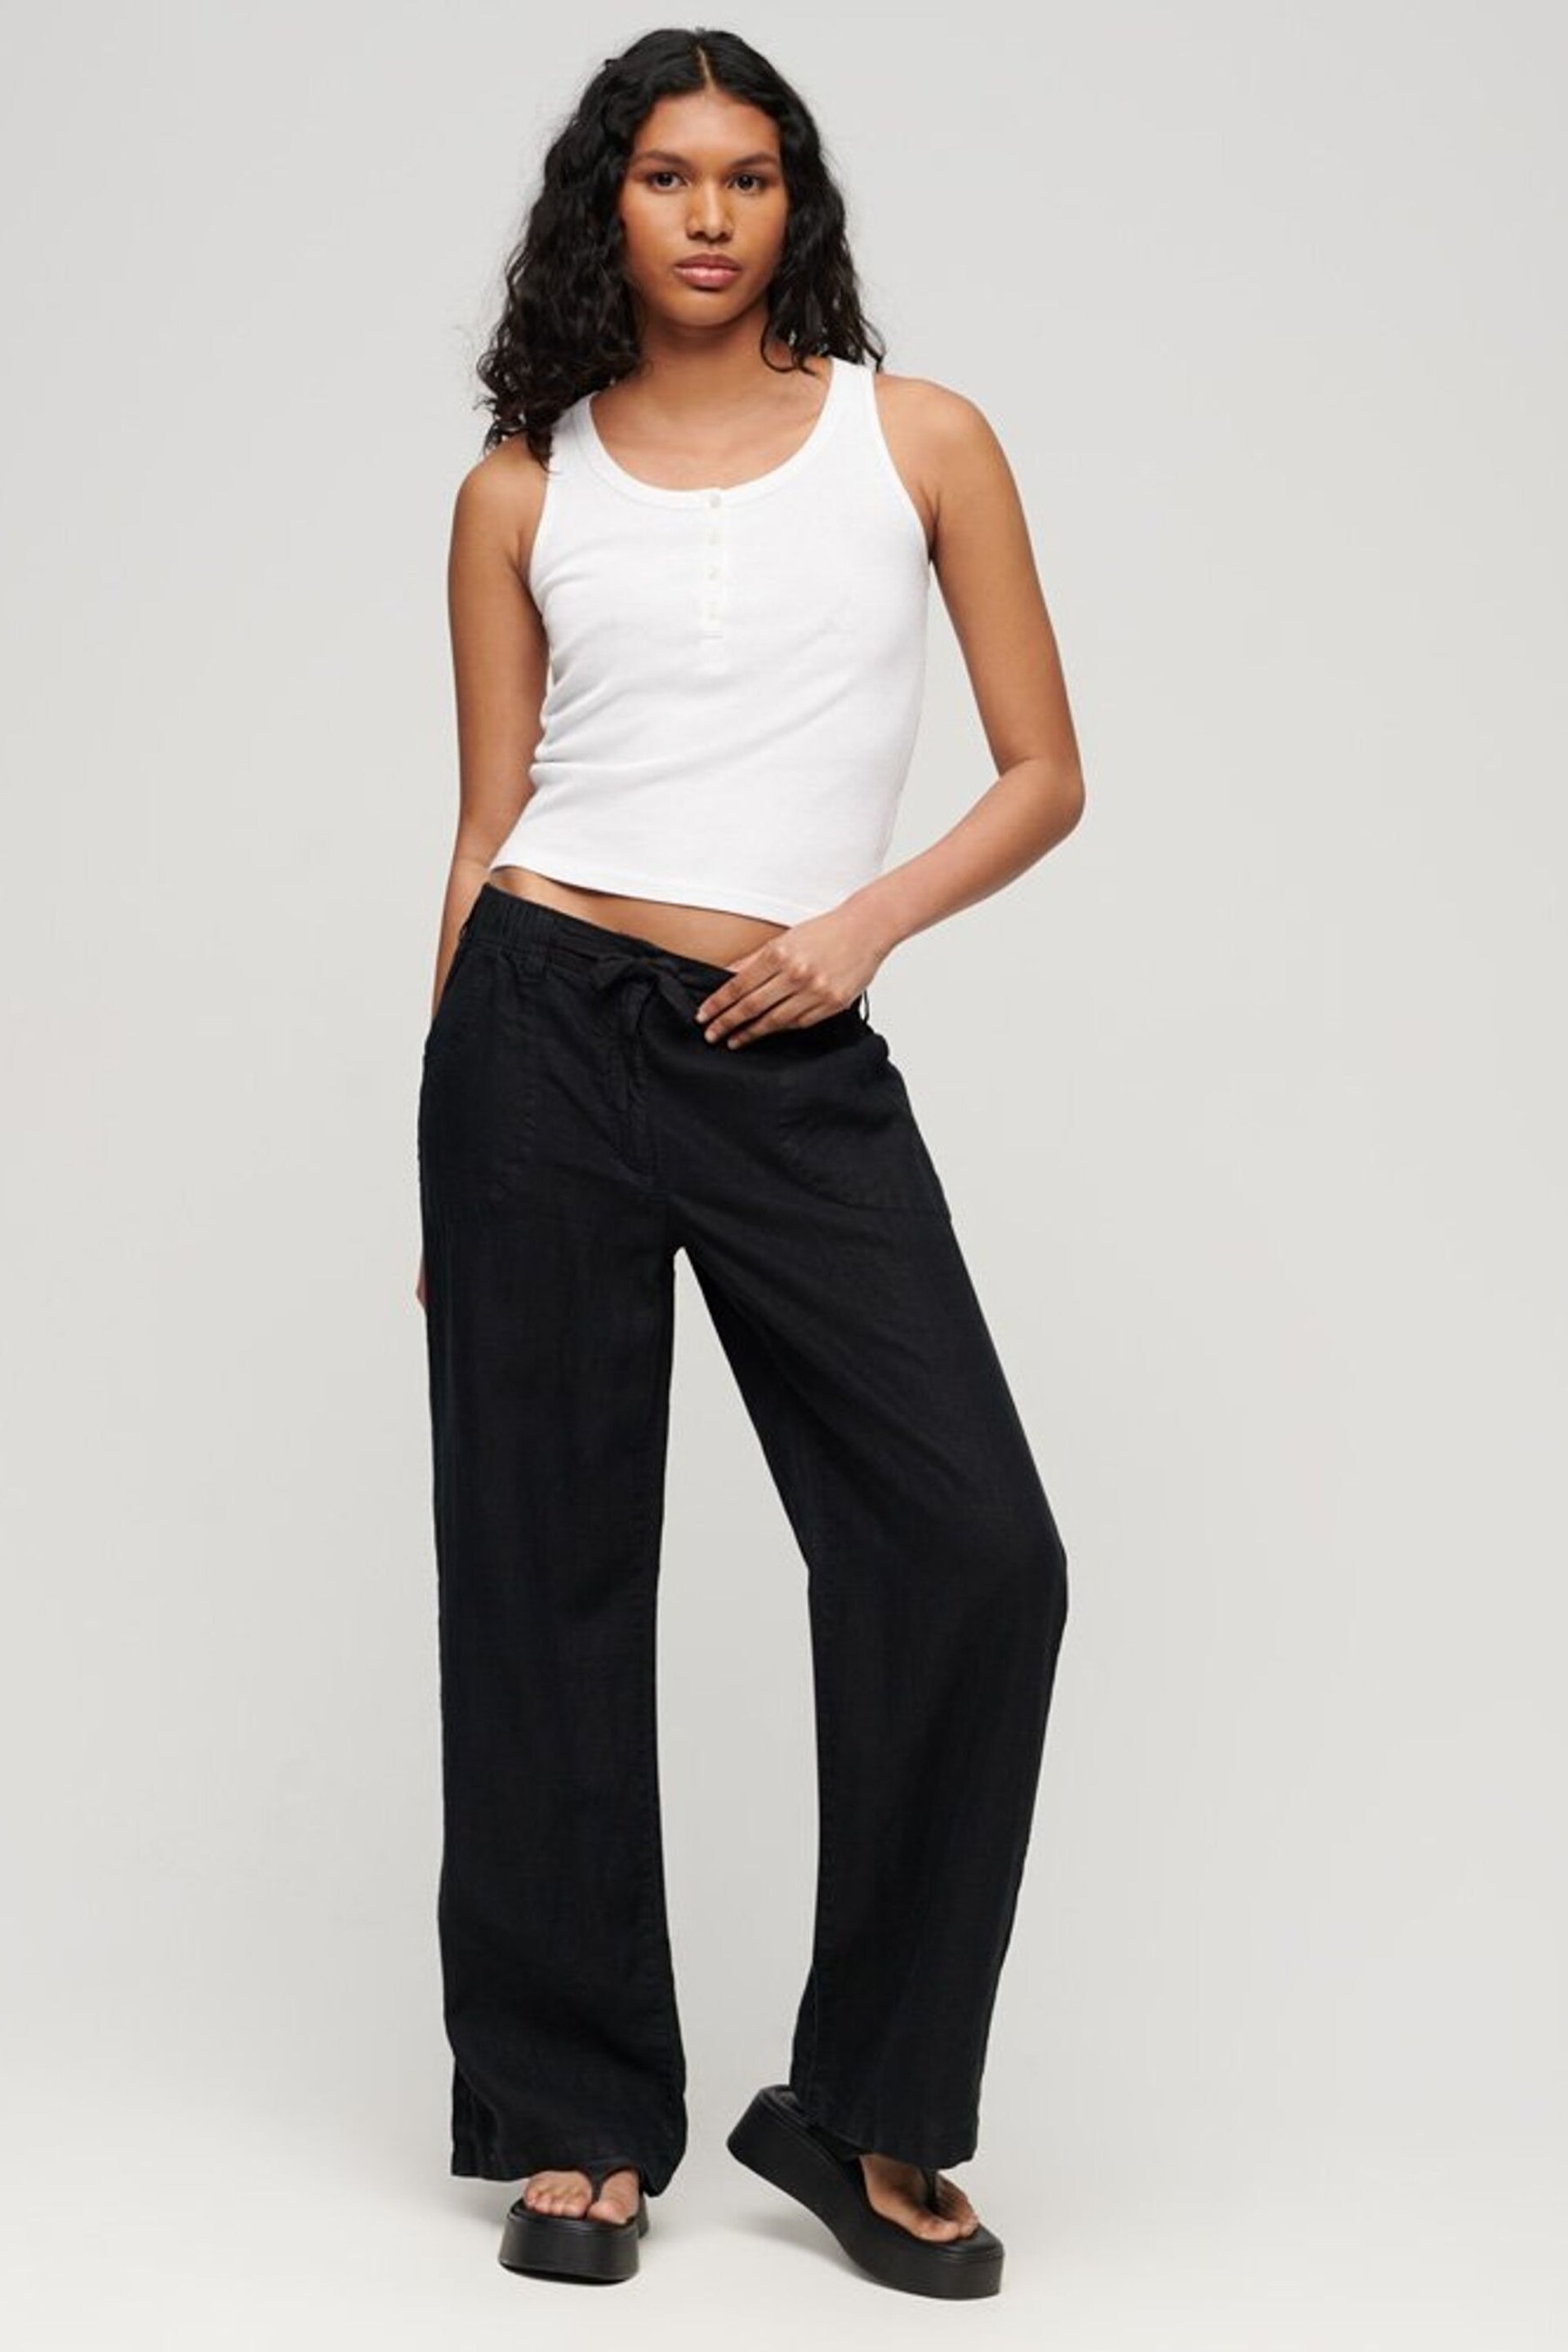 Superdry Black Linen Low Rise Trousers - Image 2 of 4